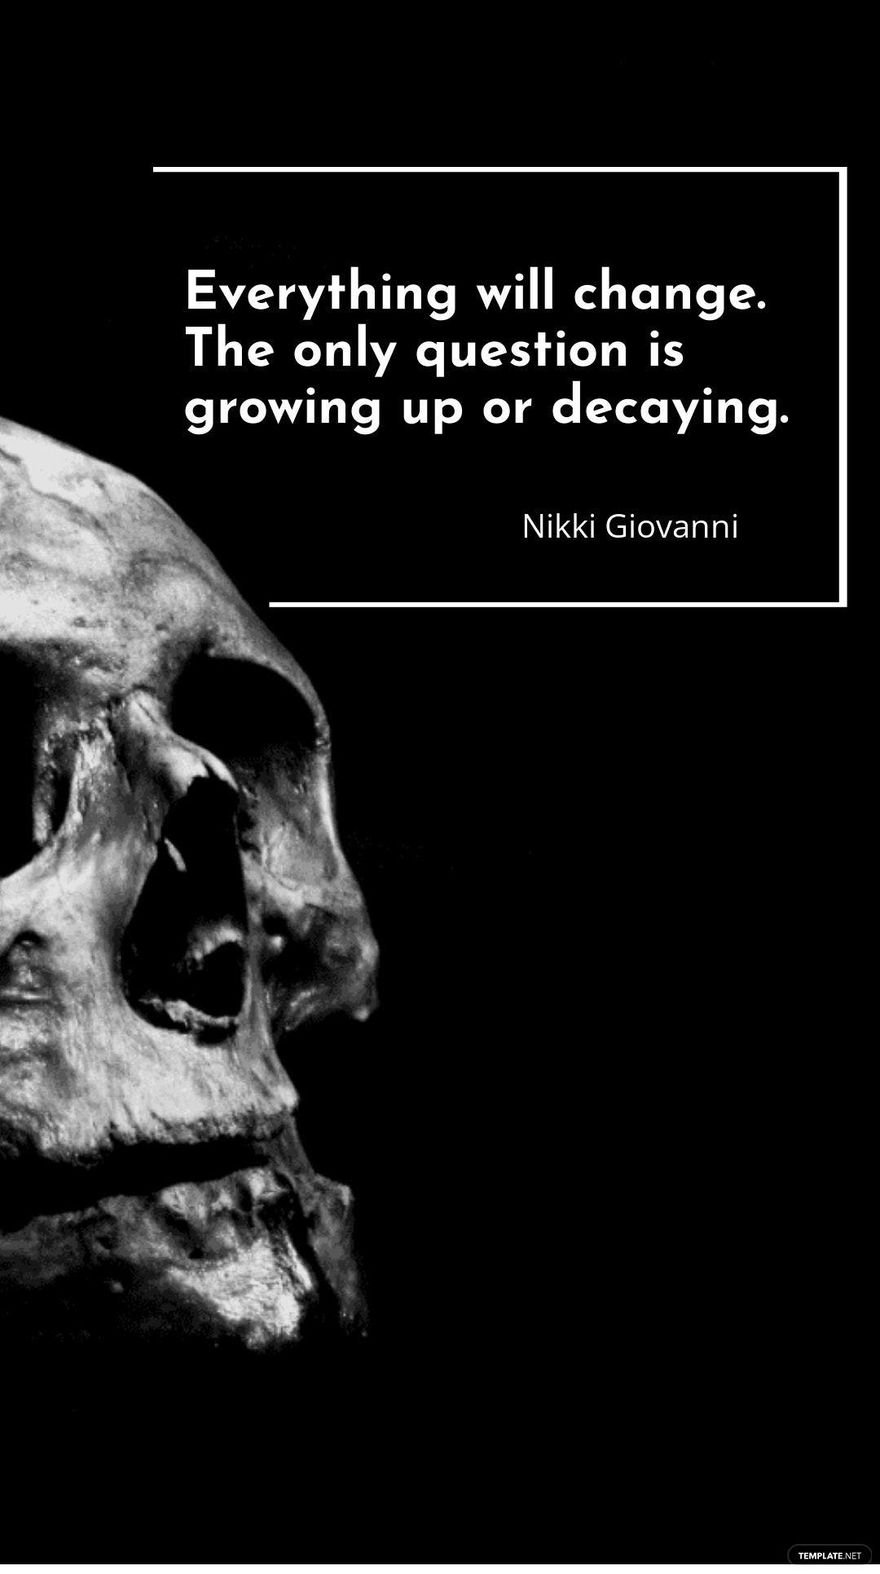 Free Nikki Giovanni - Everything will change. The only question is growing up or decaying. in JPG